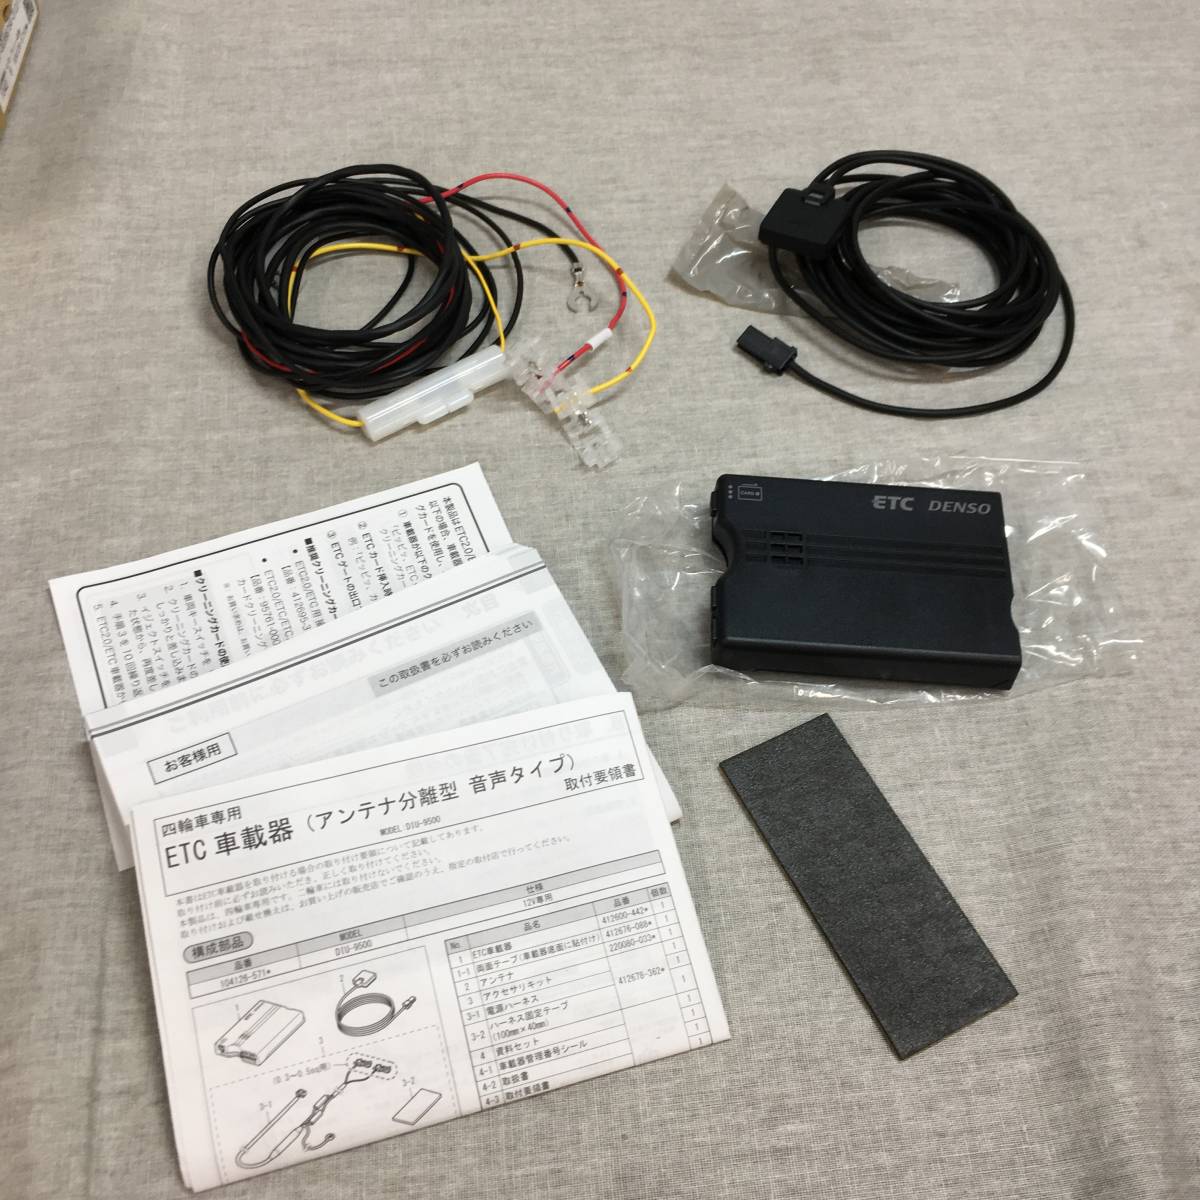  present condition goods DENSO (DENSO) new security correspondence (ETC on-board device ) antenna sectional pattern sound type DC12V car DIU-9500